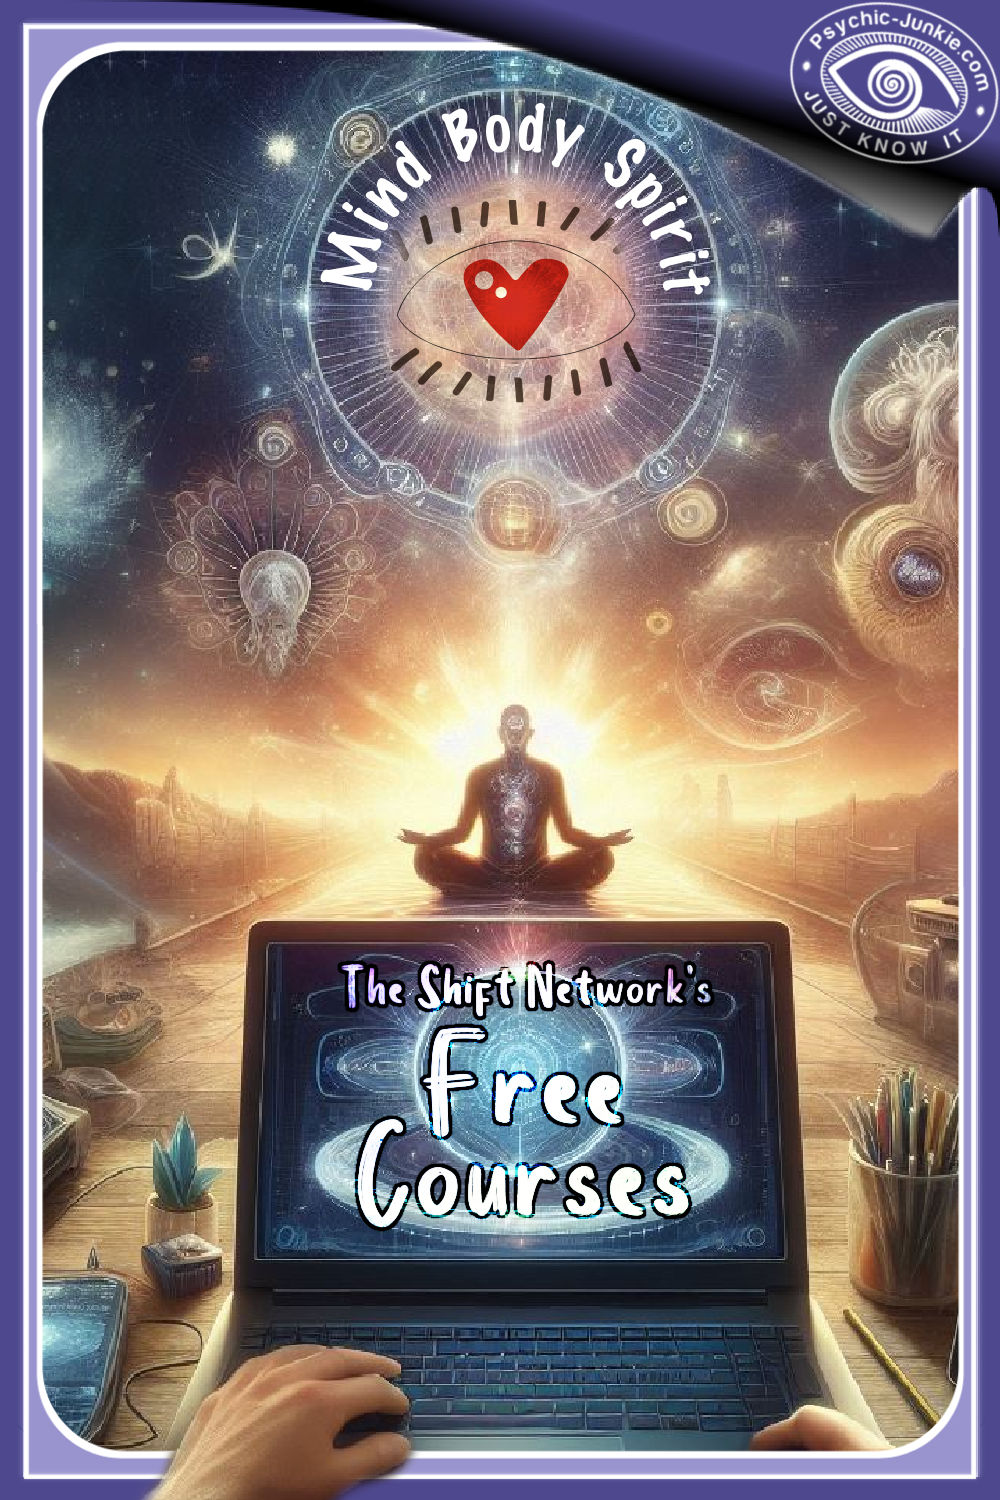 The Best Shift Network Free Courses For Psychic Junkies Like Us